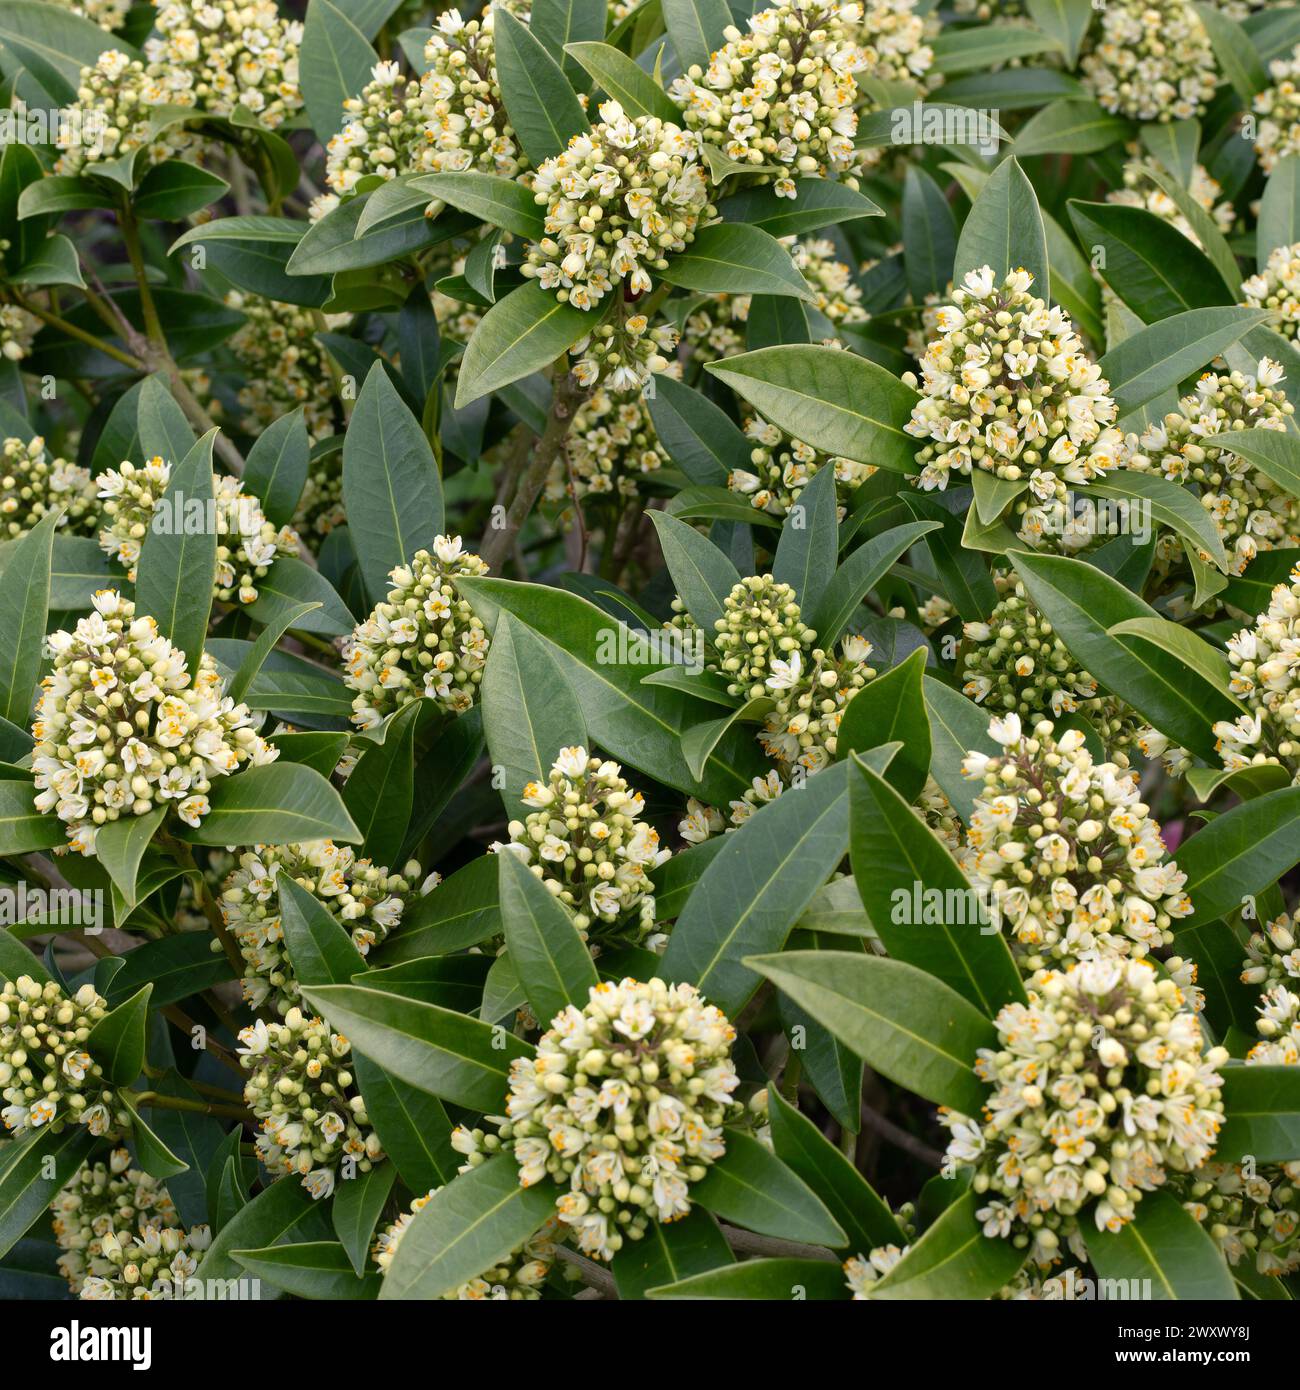 Closeup of flowers of Skimmia × confusa 'Kew Green' in a garden in Spring Stock Photo